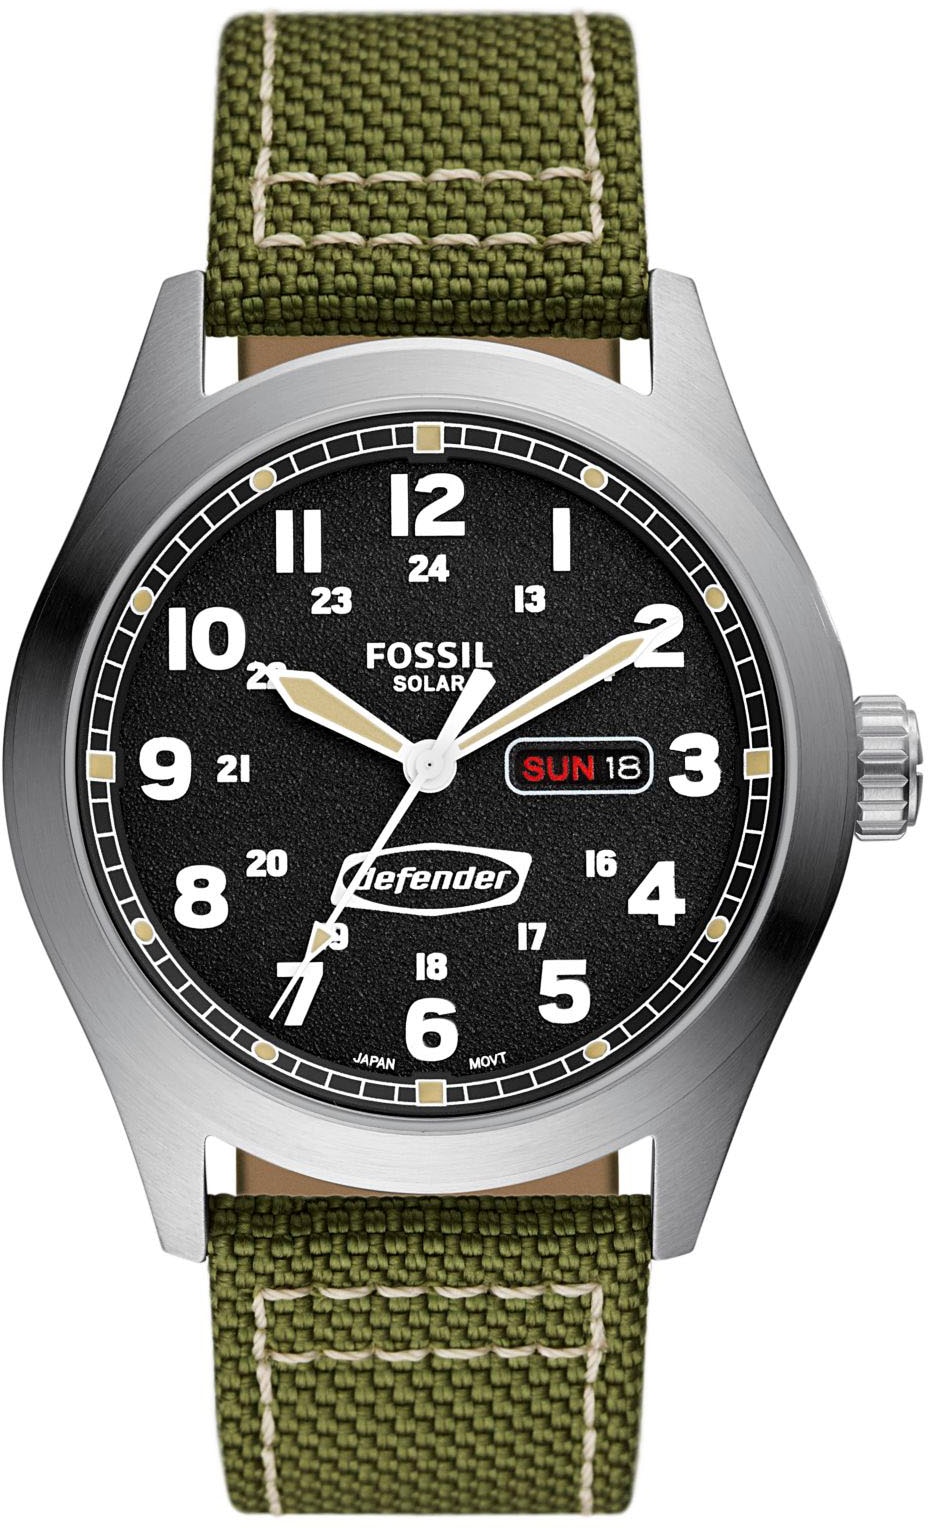 limited shoppen online Solaruhr FS5977«, »DEFENDER, OTTO edition bei Fossil